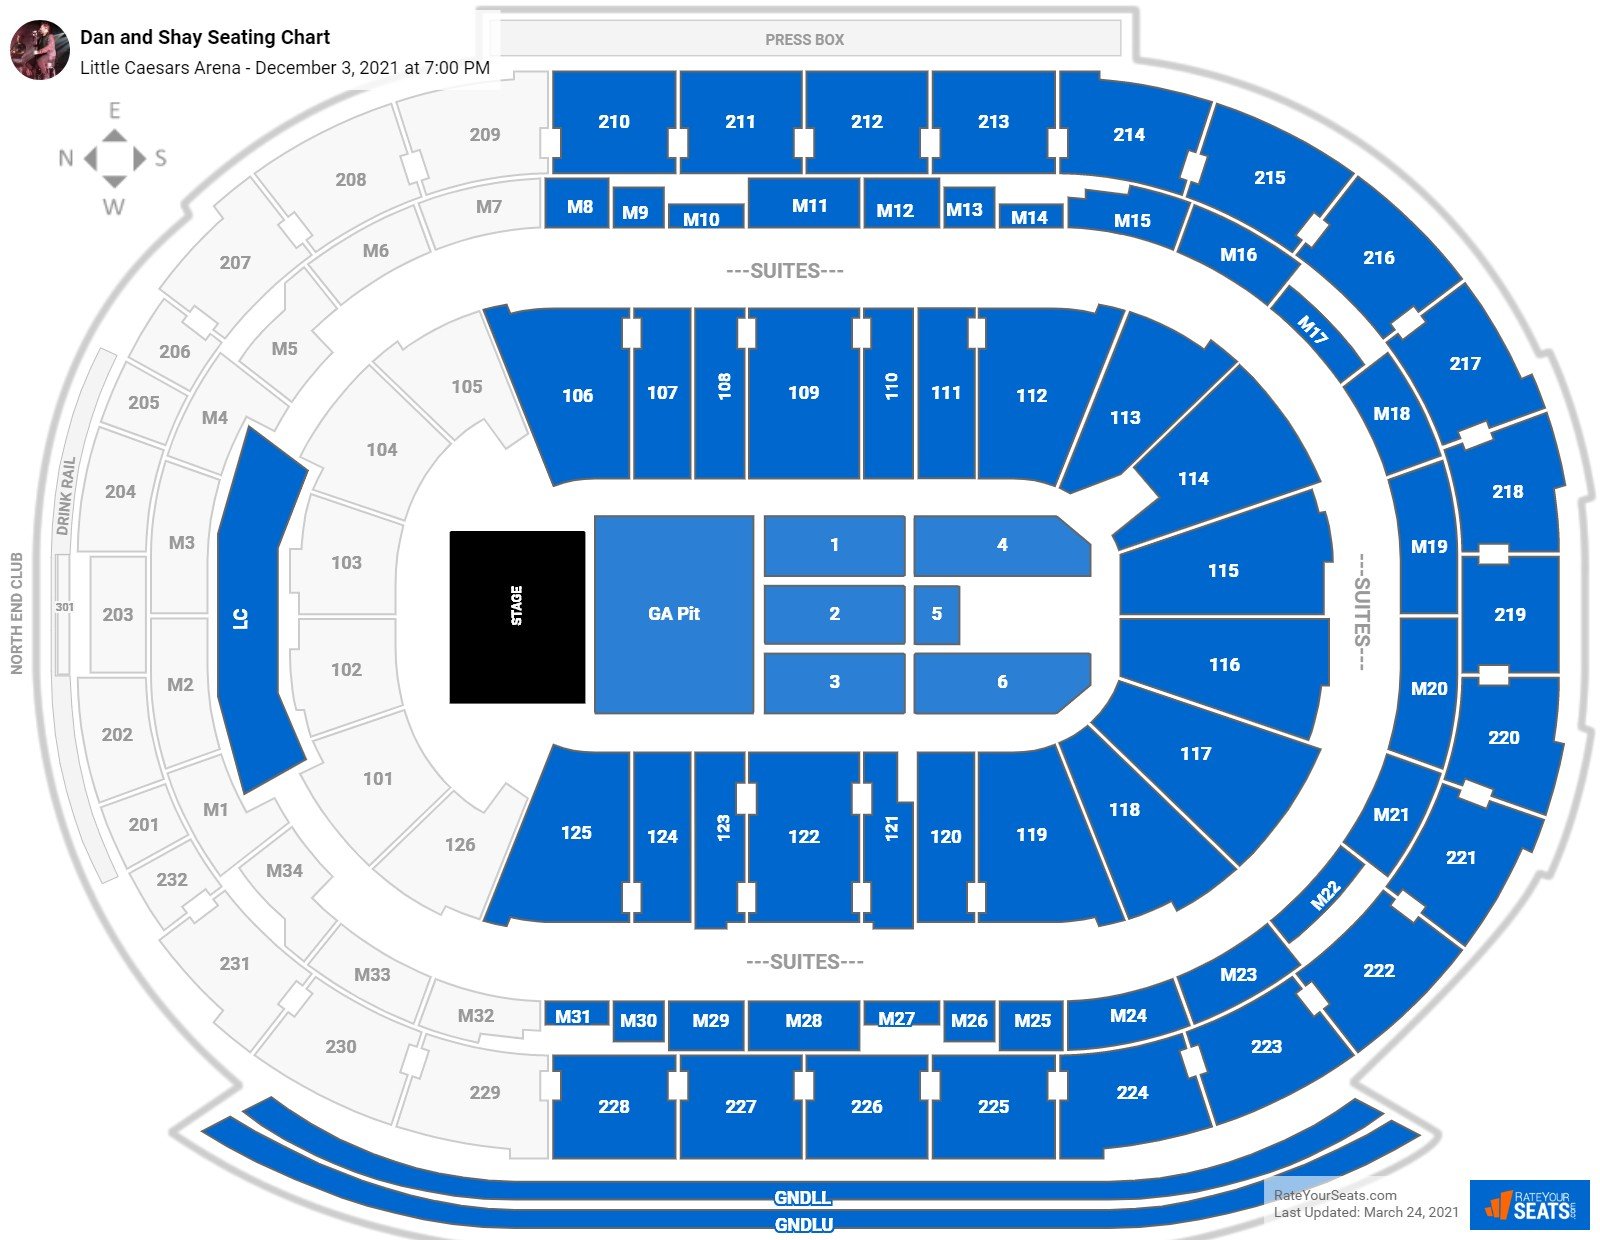 Little Caesars Arena Seating Charts for Concerts